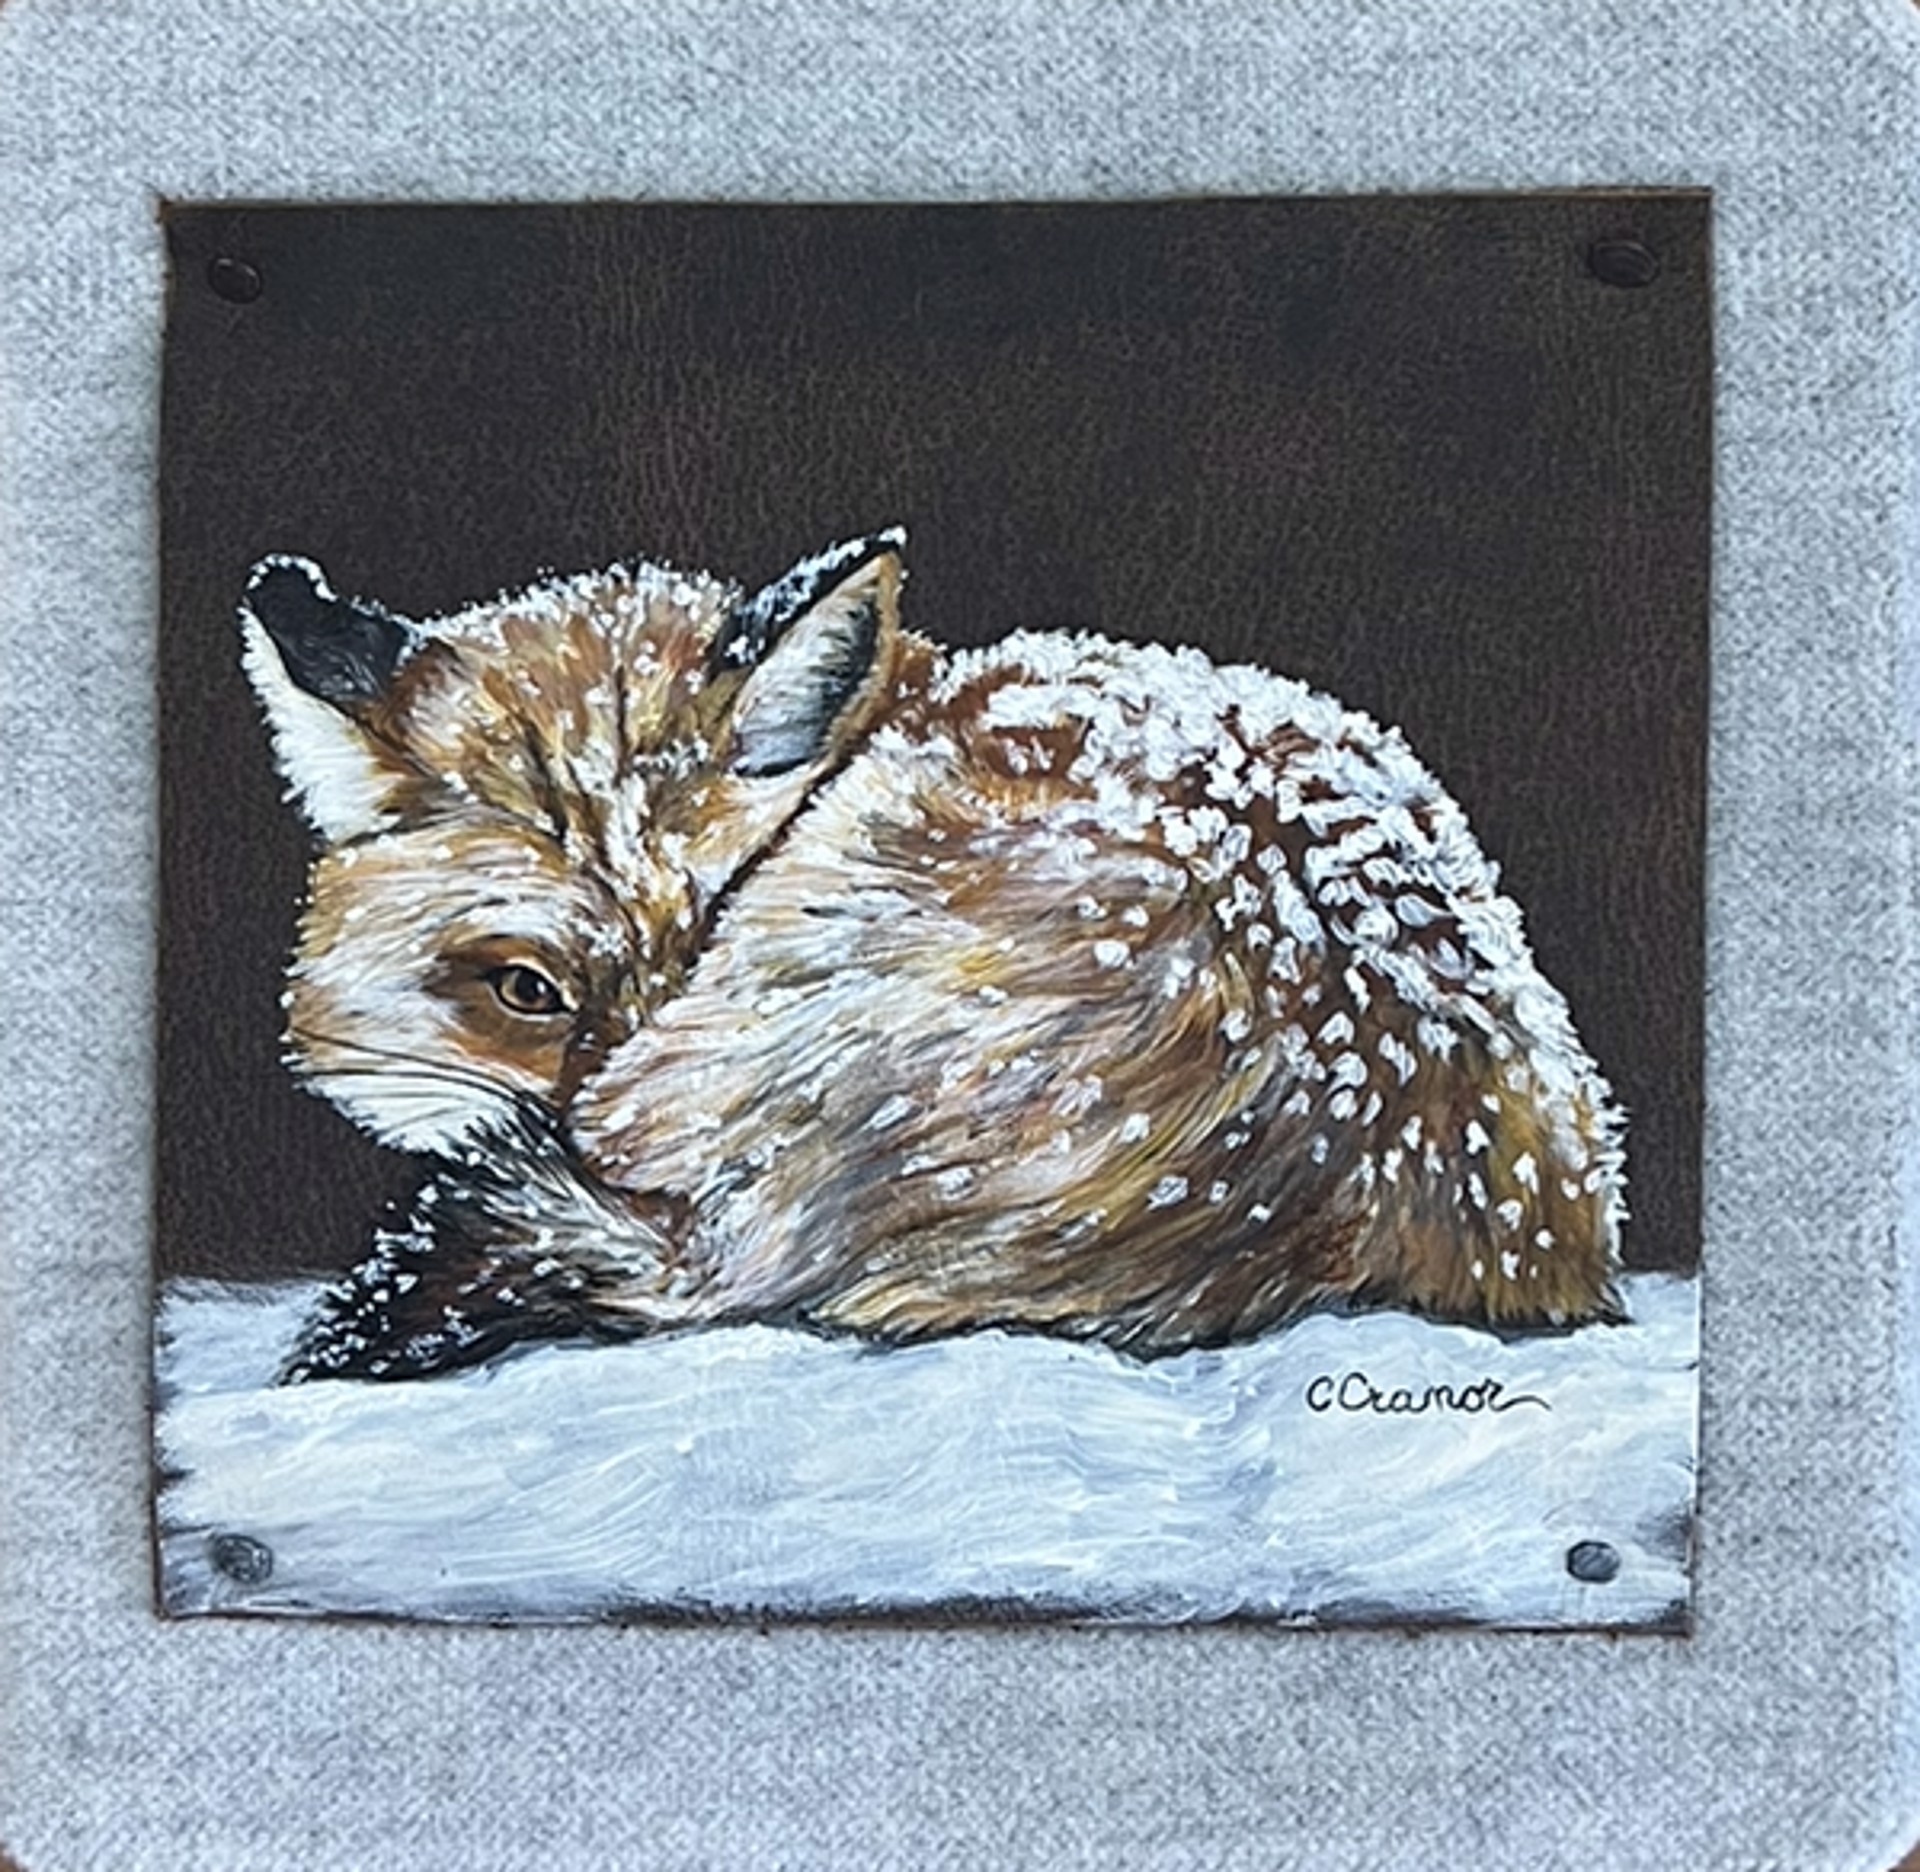 Snuggled in the Snow by Cindy Cranor